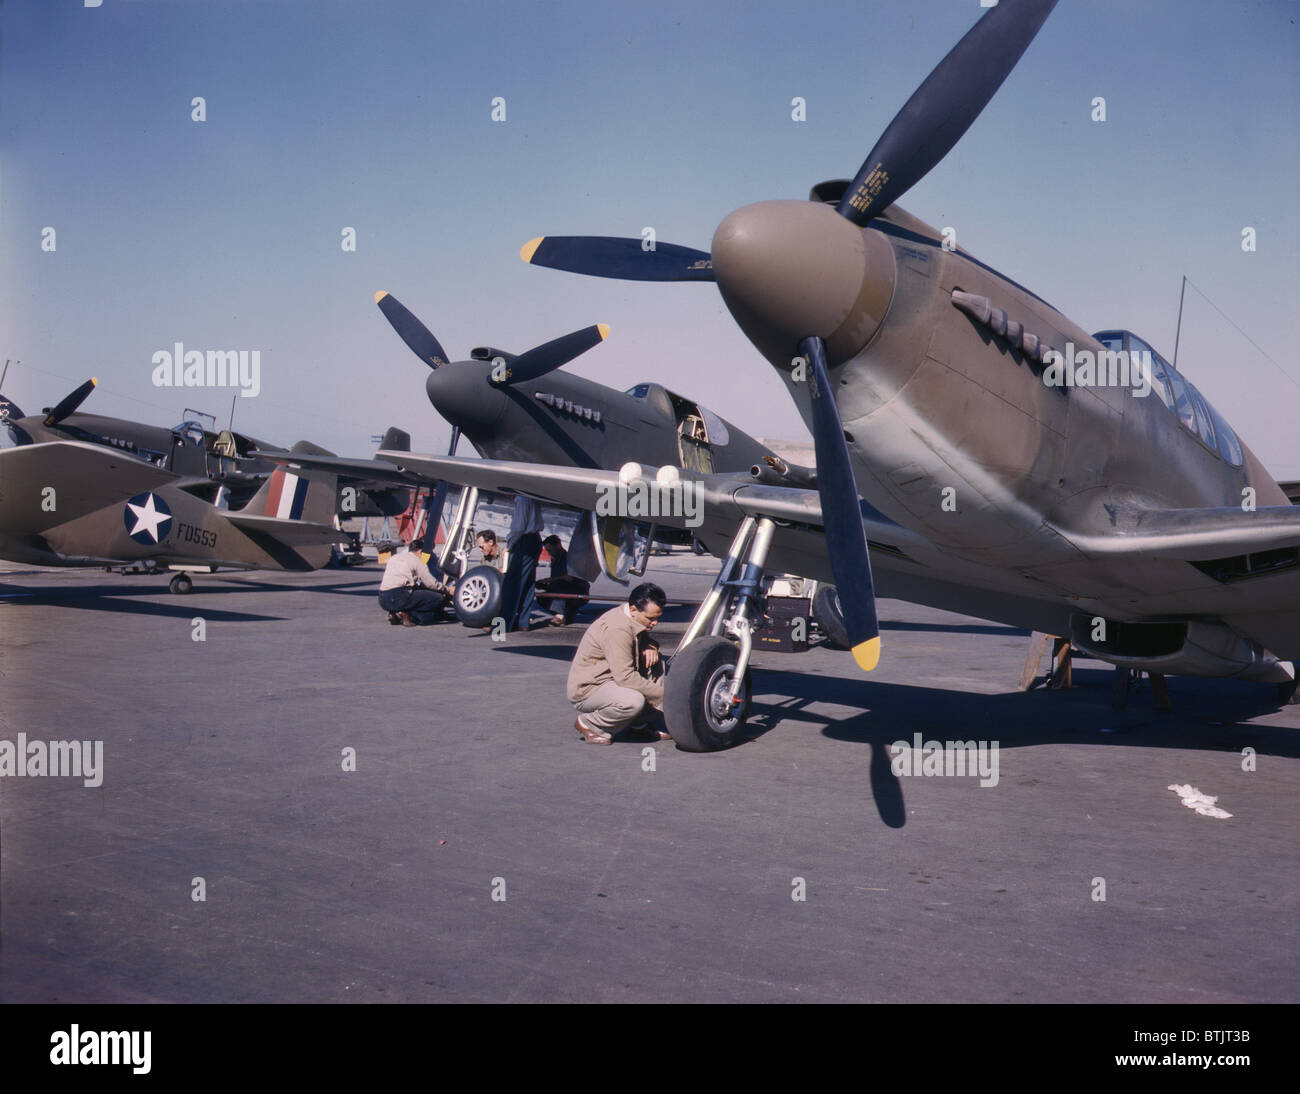 World War II, P-51 mustang fighter planes being prepared for test flight at the field of the North American Aviation Inc. Plant, photograph by Alfred T. Palmer, Inglewood, California, October, 1942. Stock Photo